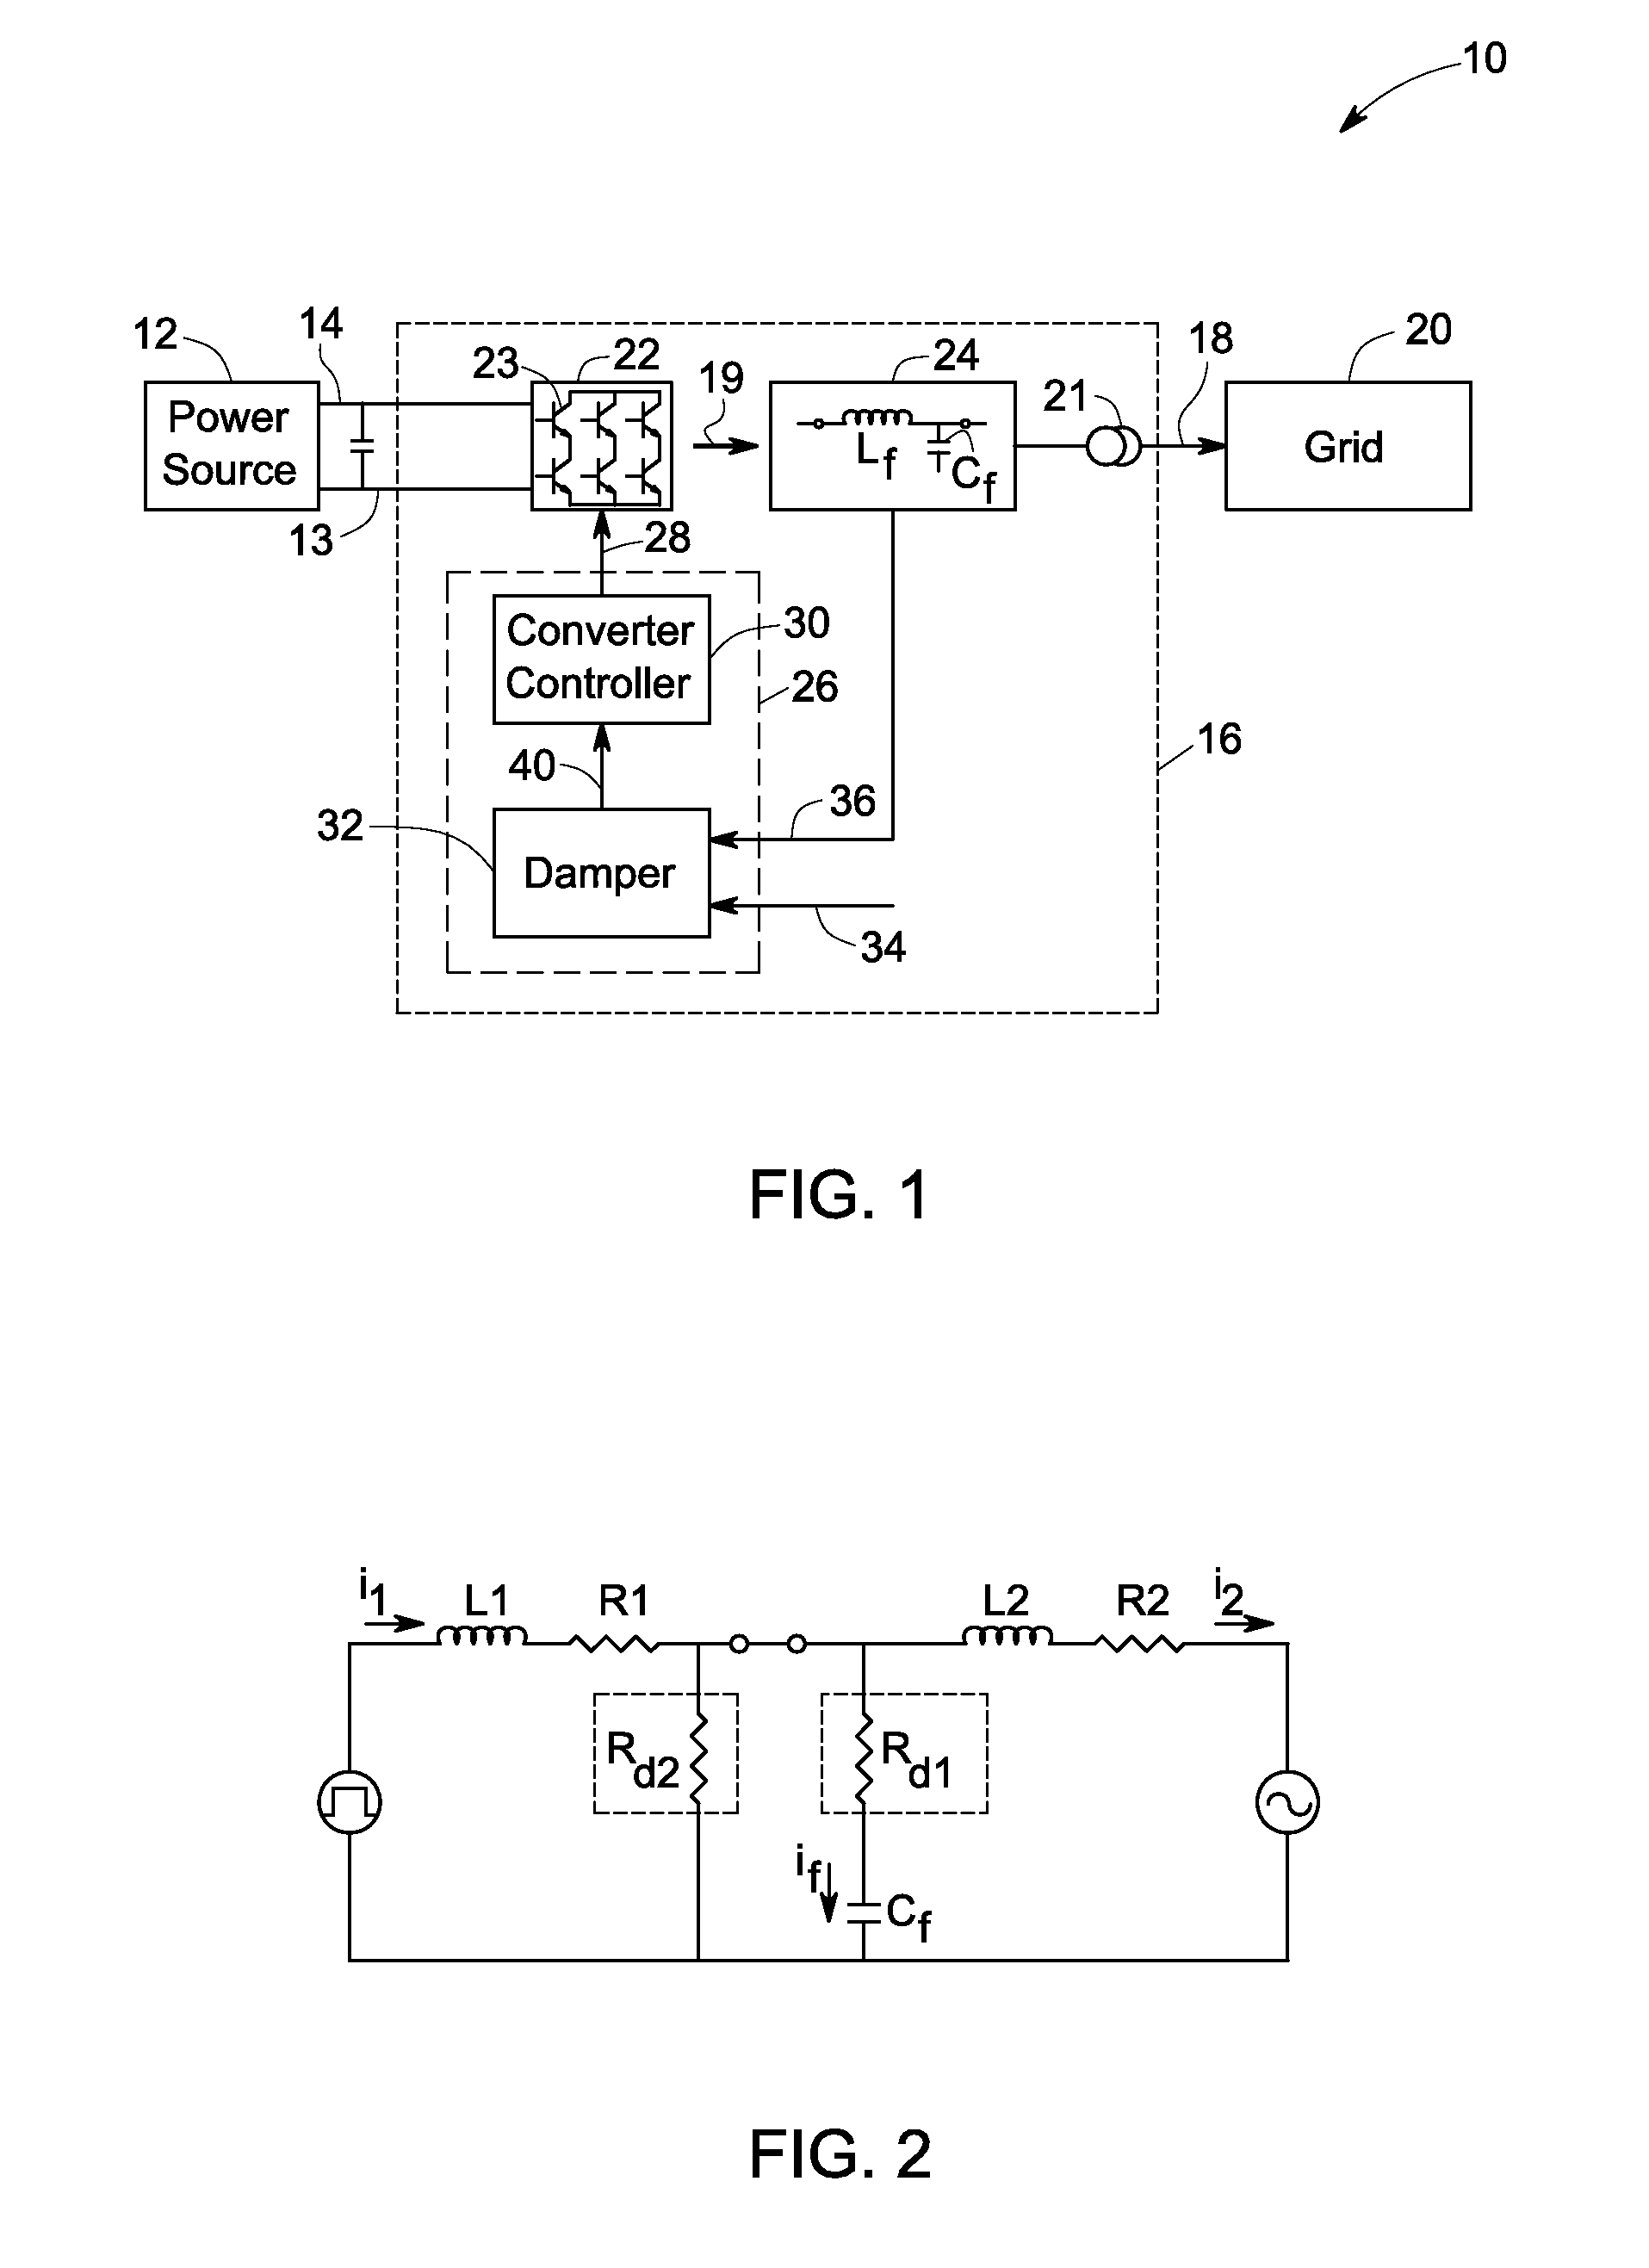 System and method for damping lc circuits in power conversion systems